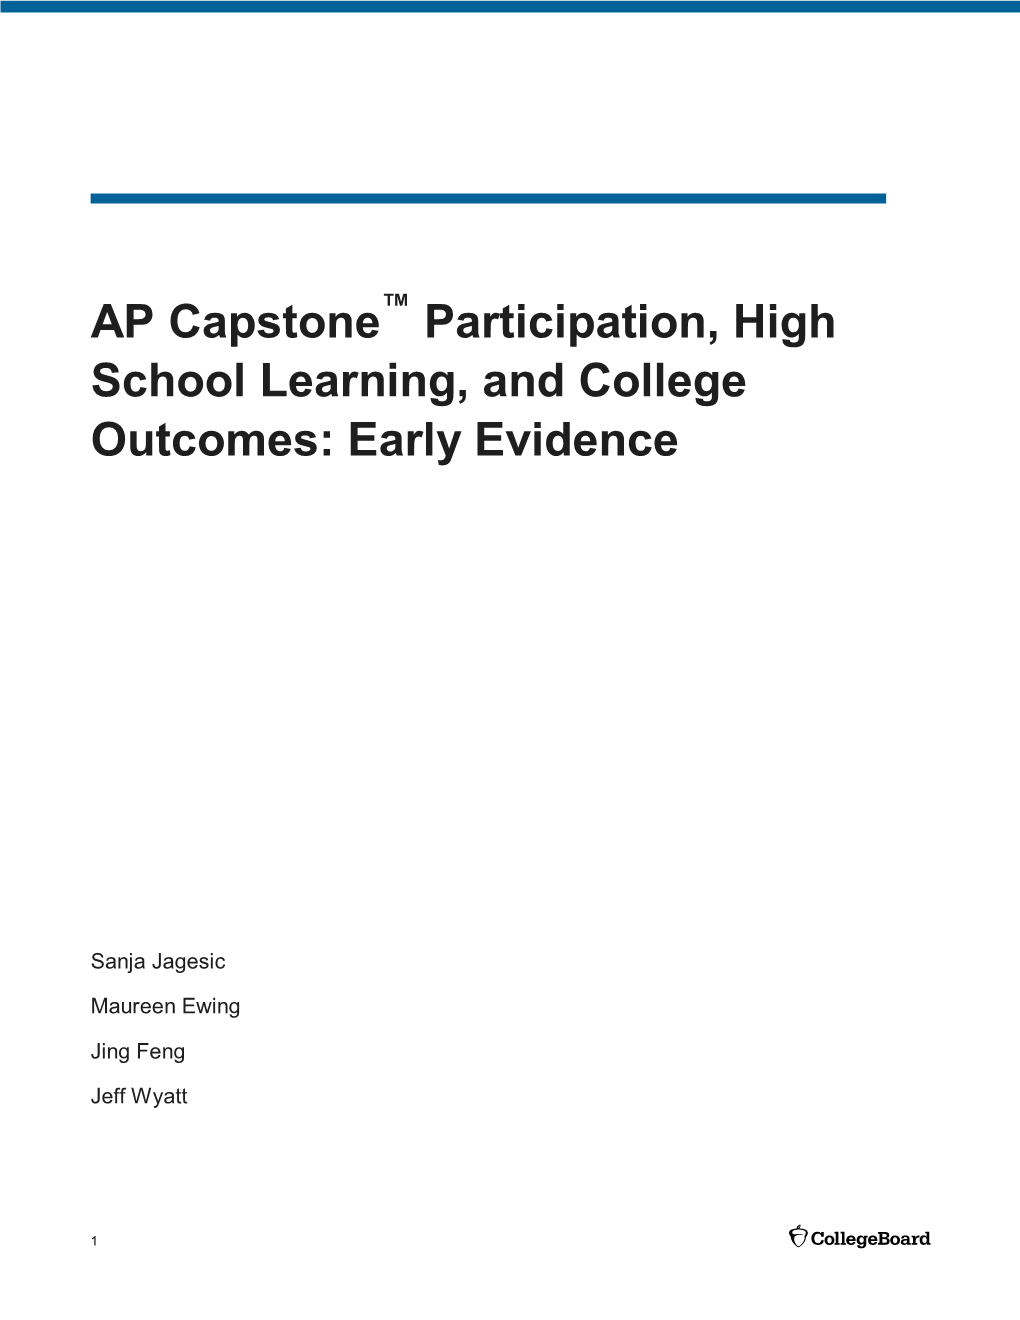 AP Capstone™ Participation, High School Learning, And